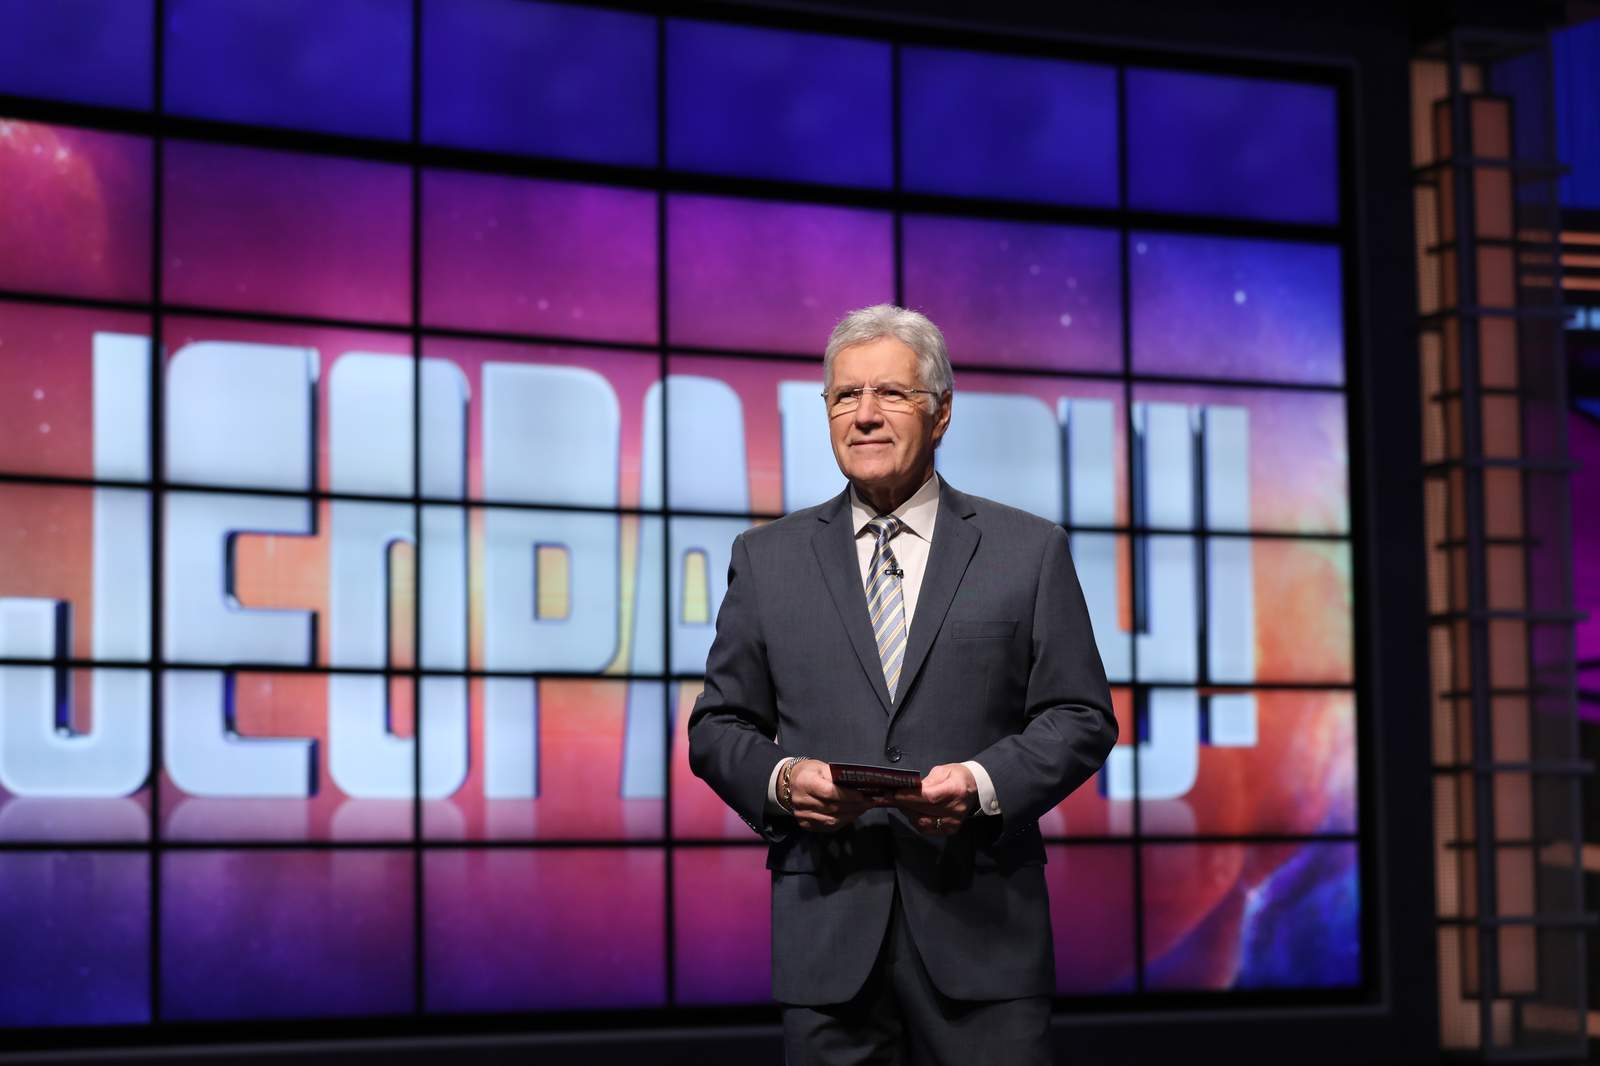 Longtime “Jeopardy!” host Alex Trebek dies at 80 after long battle with cancer